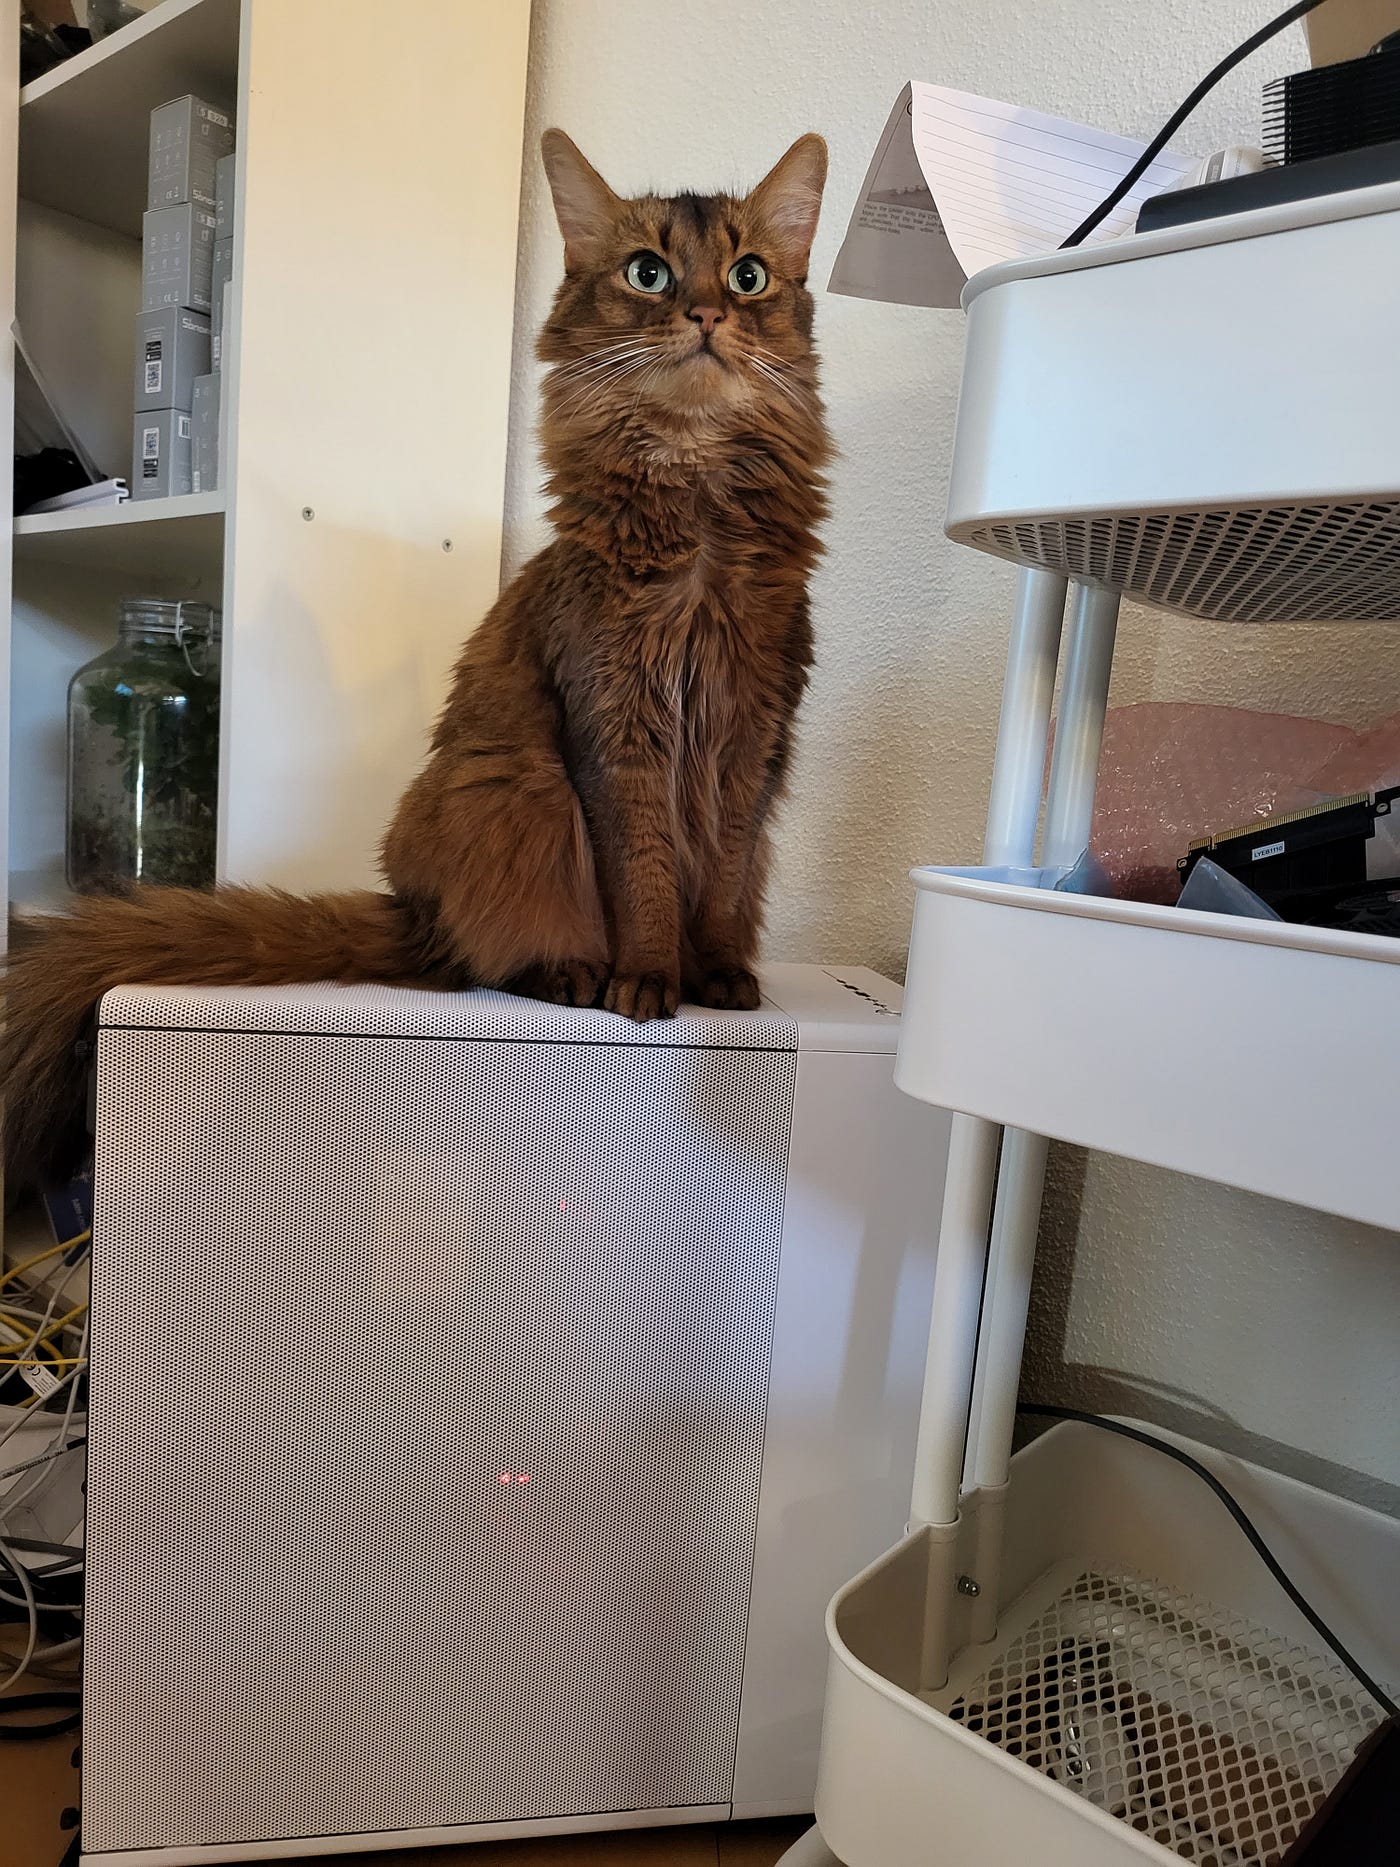 Dark Ginger Cat (Somali) sits on top of a PC